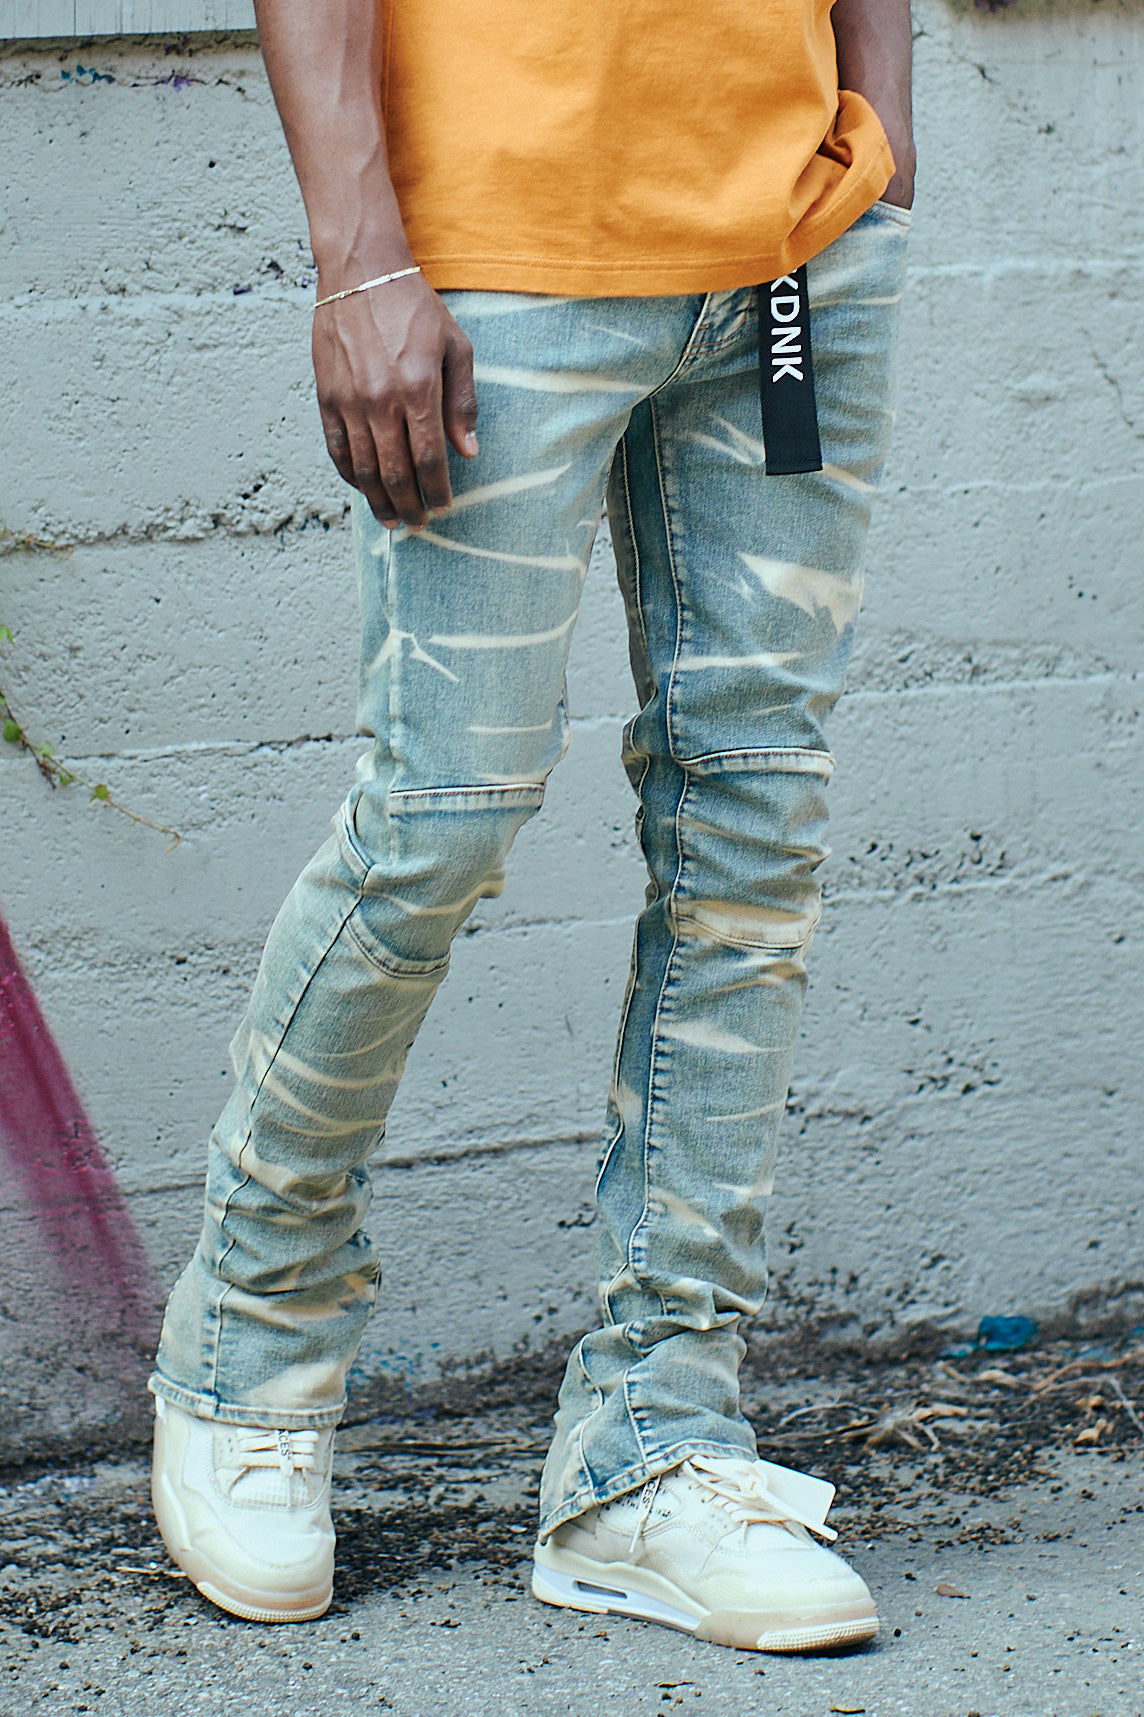 Men Stacked Jeans, Men Ripped Jeans Skinny Fit Stacked Leg Denim Stretch  Jeans Streetwear Trousers